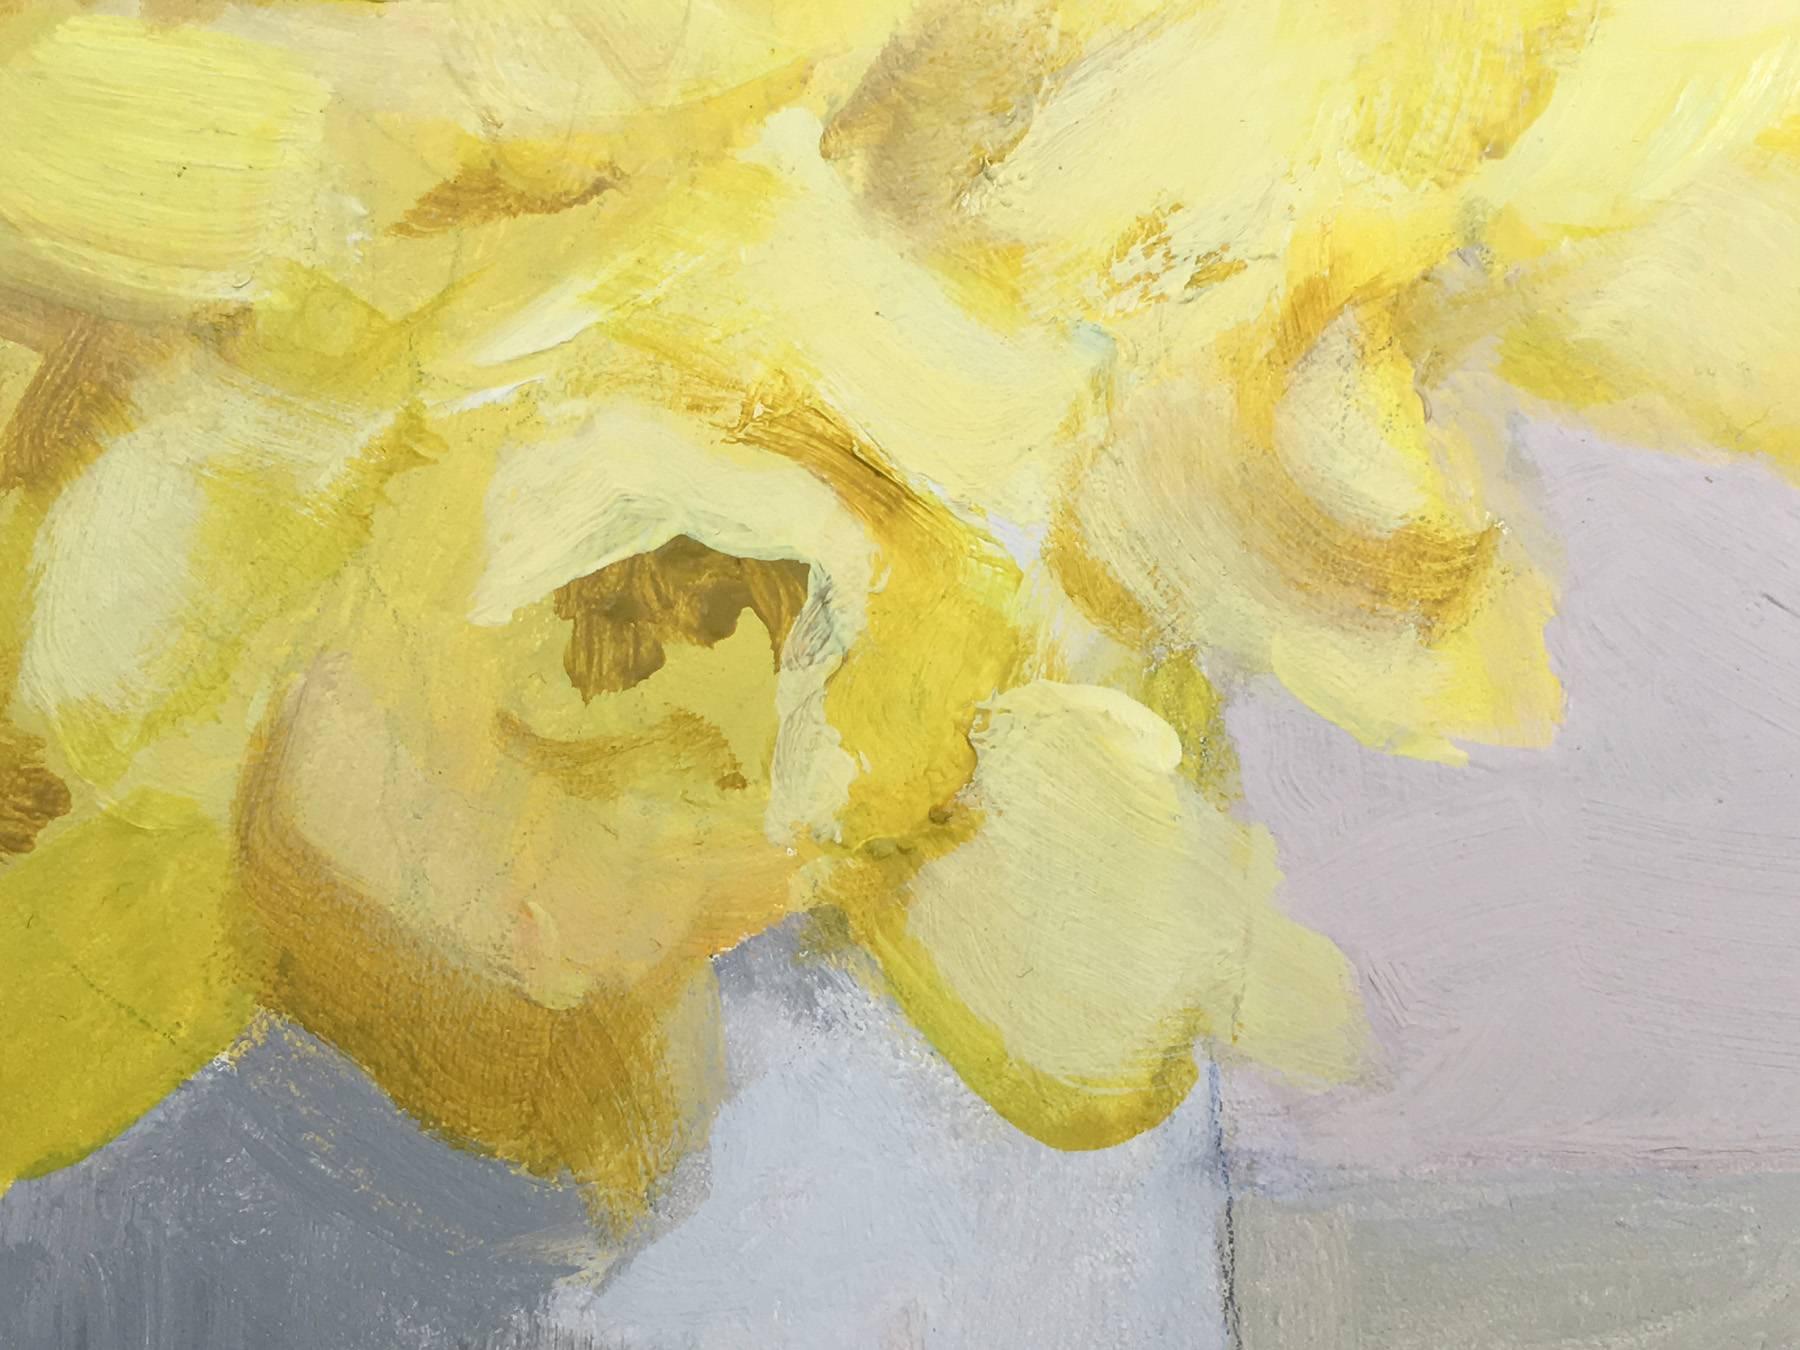 Flower #2 (Yellow Flower) - Contemporary Painting by James Wilson Rayen